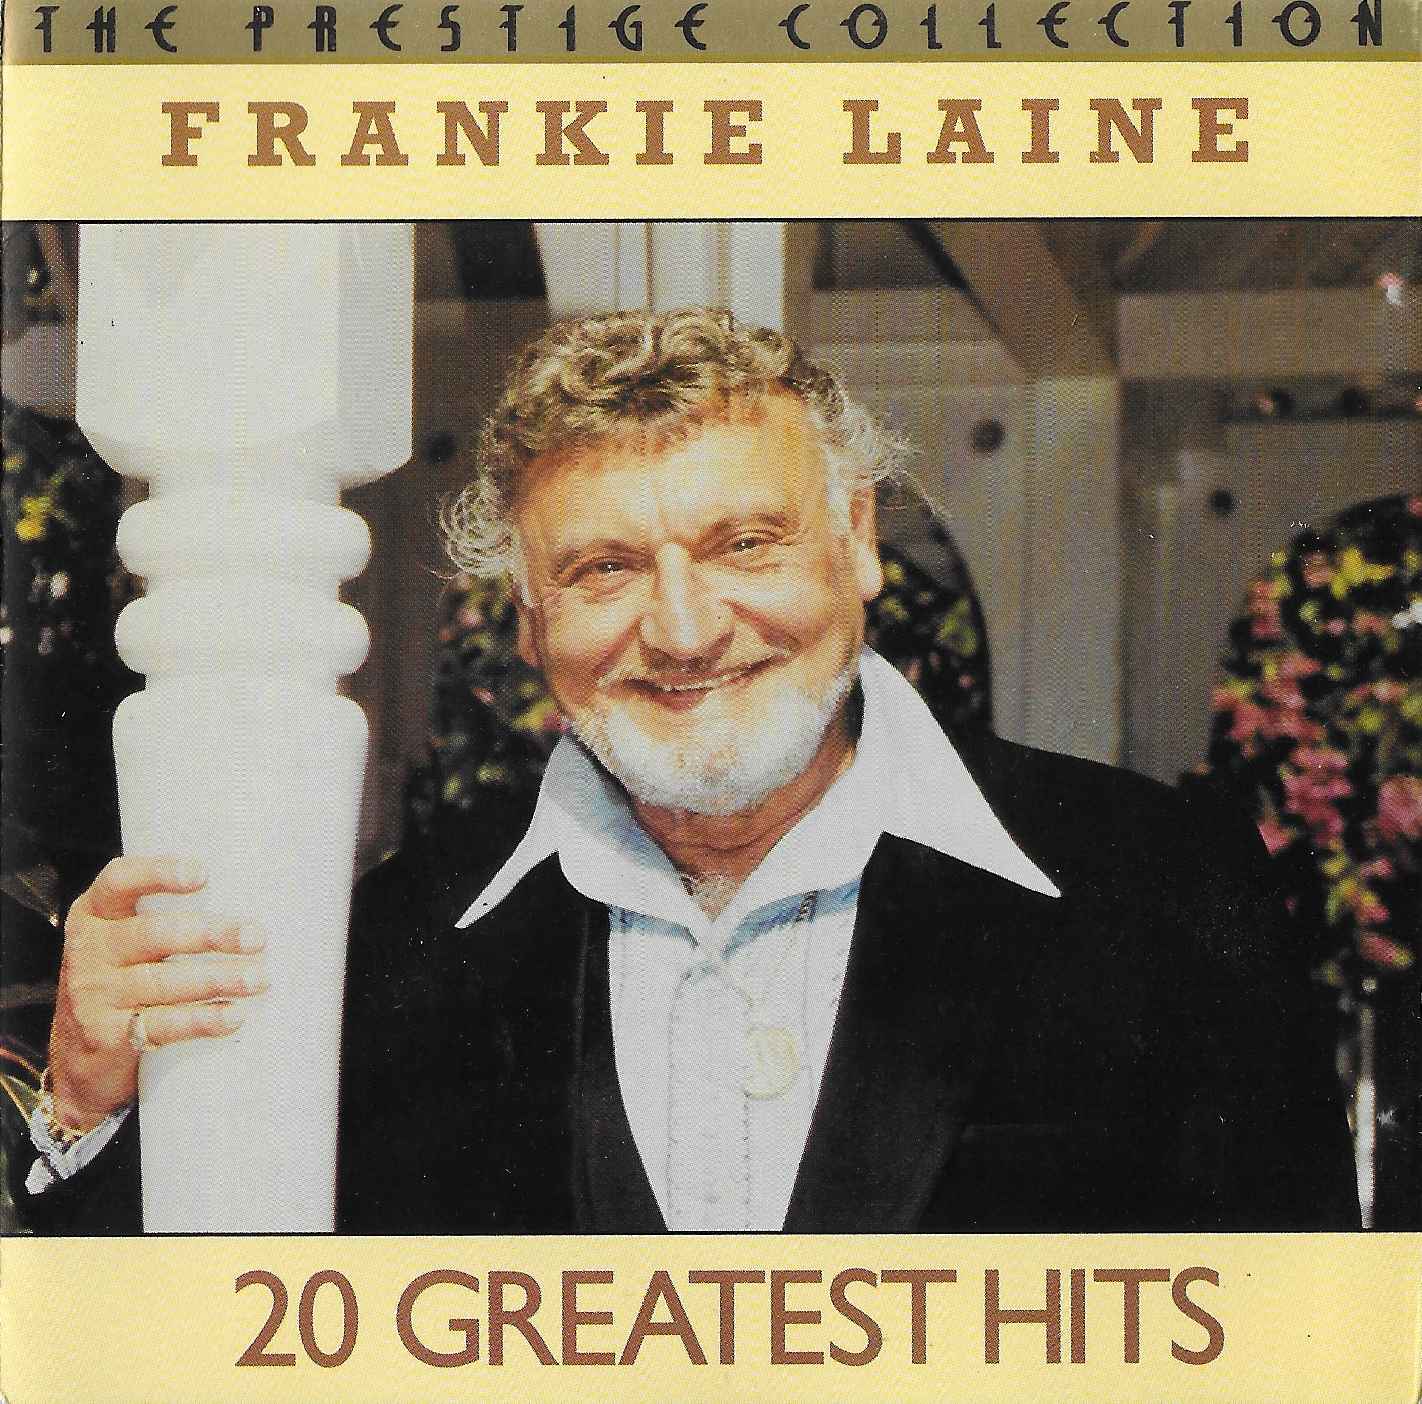 Picture of 20 greatest hits by artist Frankie Laine from the BBC cds - Records and Tapes library